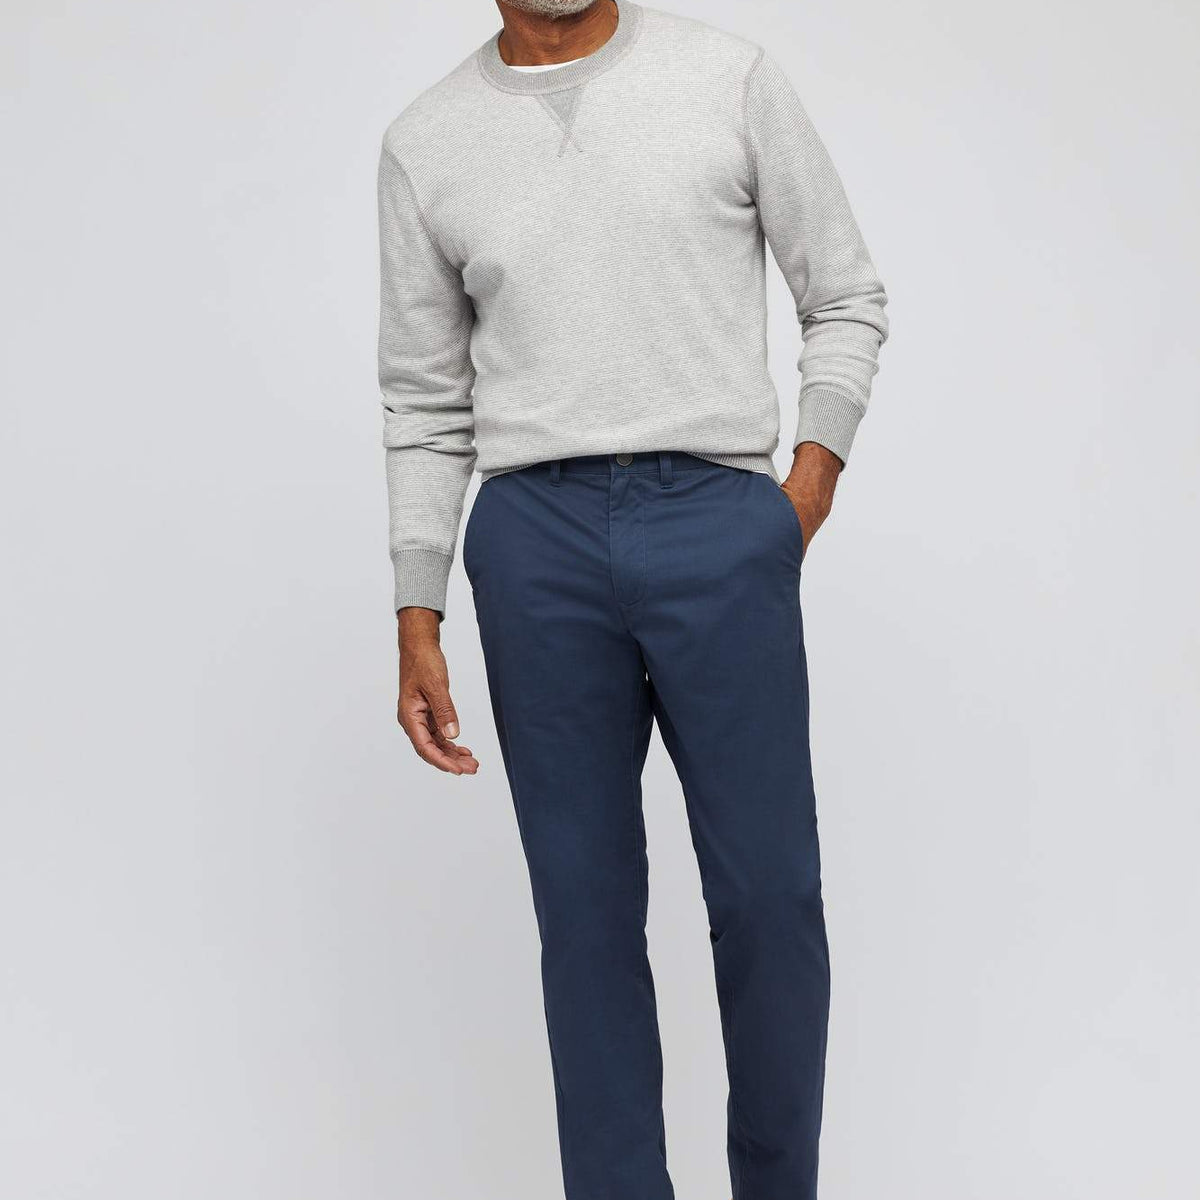 Bonobos Stretch Slim After Midnights Chino- Washed